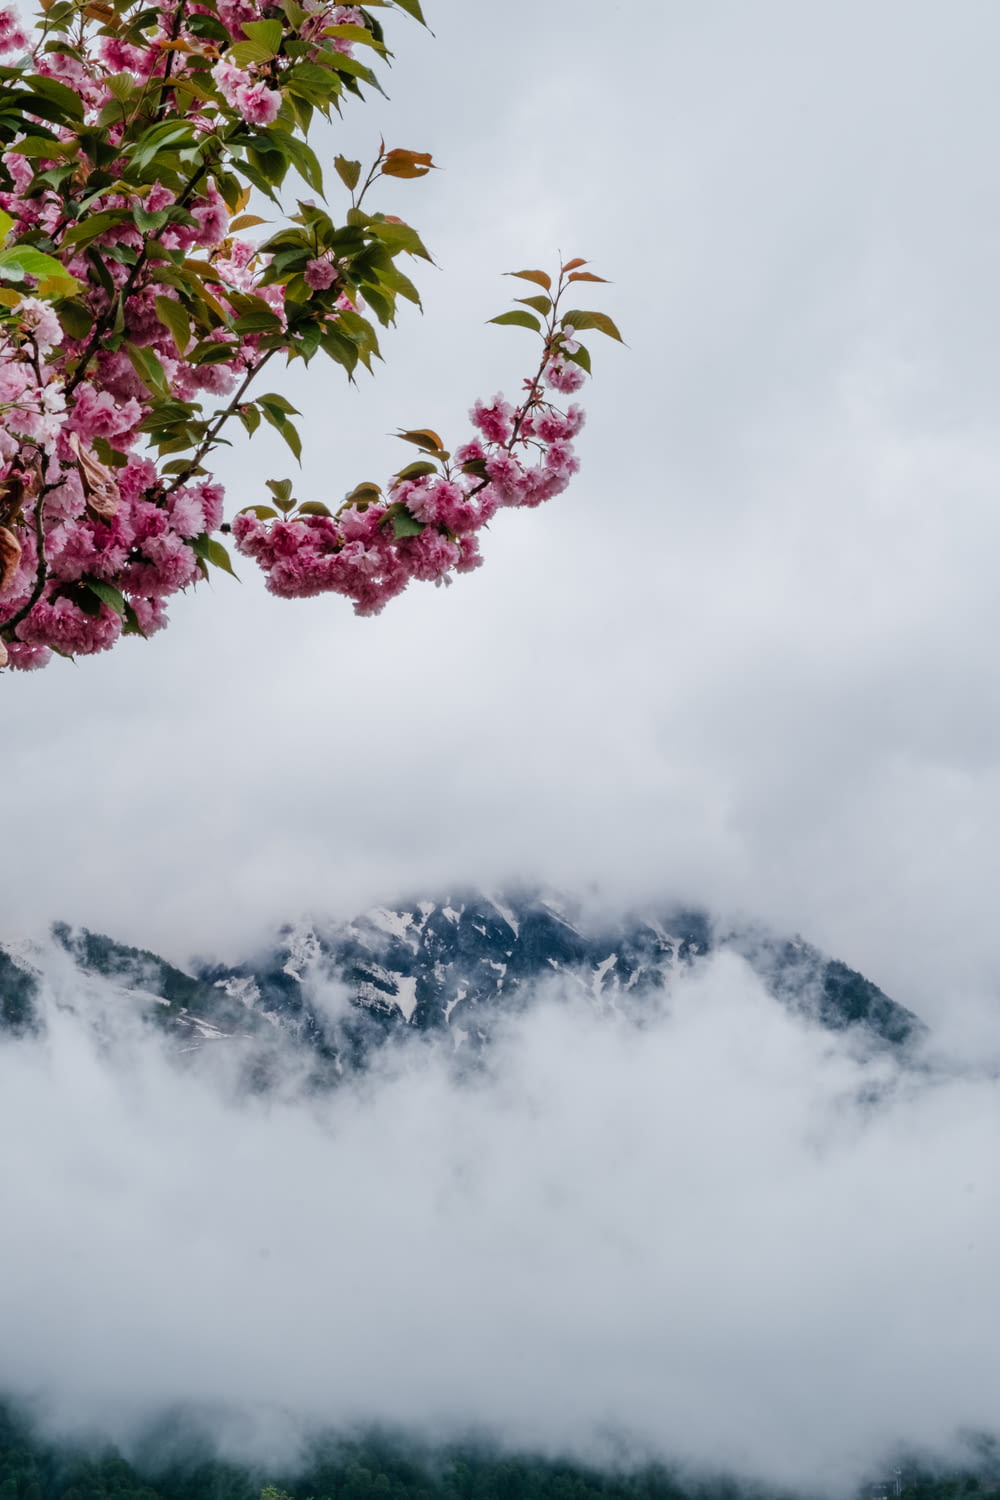 a tree with pink flowers in the foreground and a mountain in the background